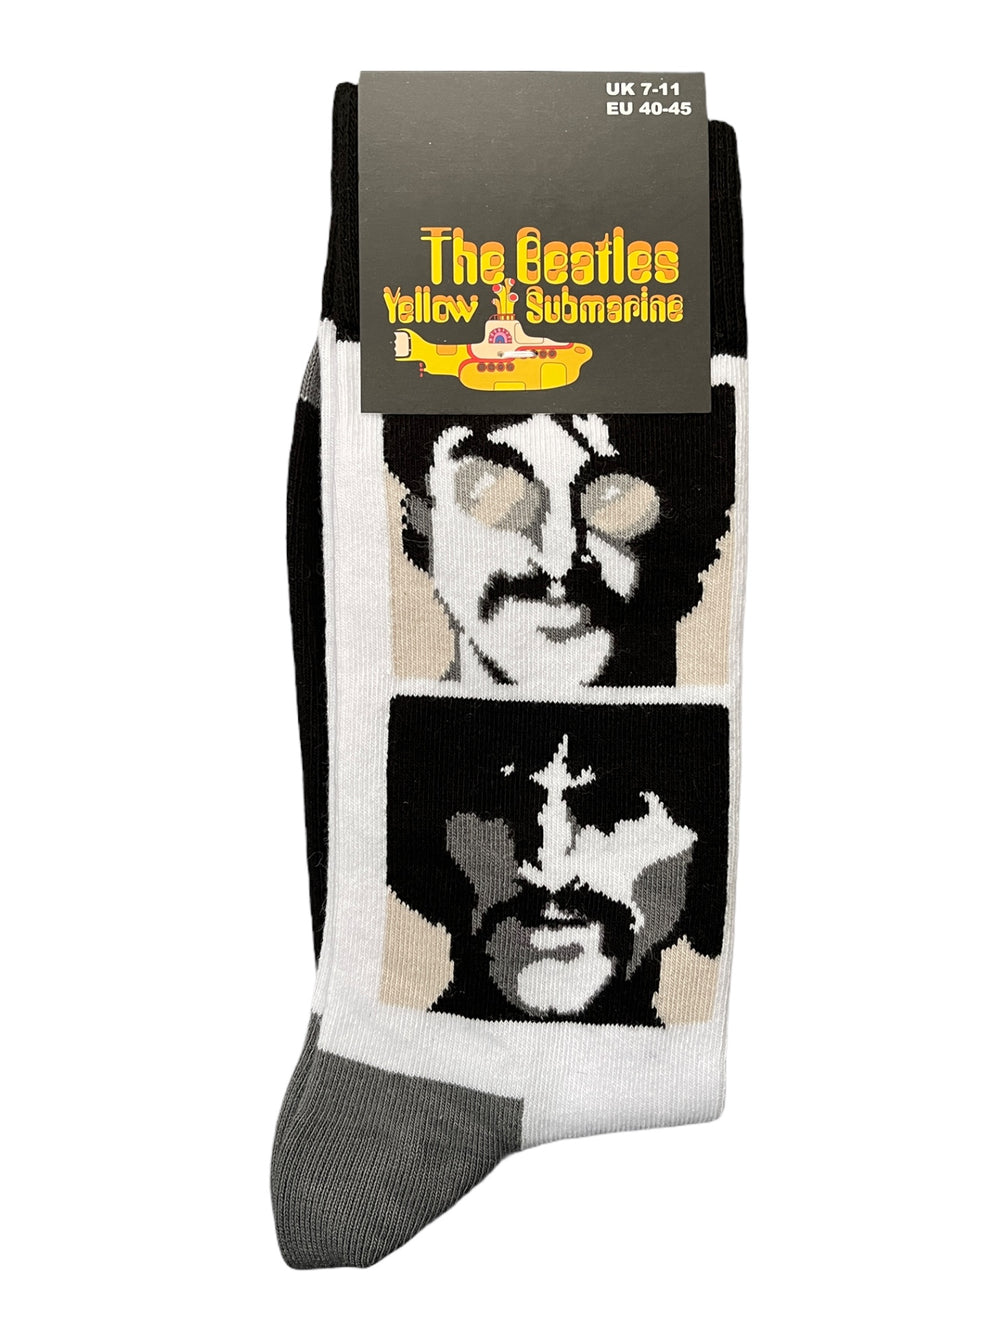 Beatles The SEA MONO WHT Official Product 1 Pair Jacquard Socks Brand New